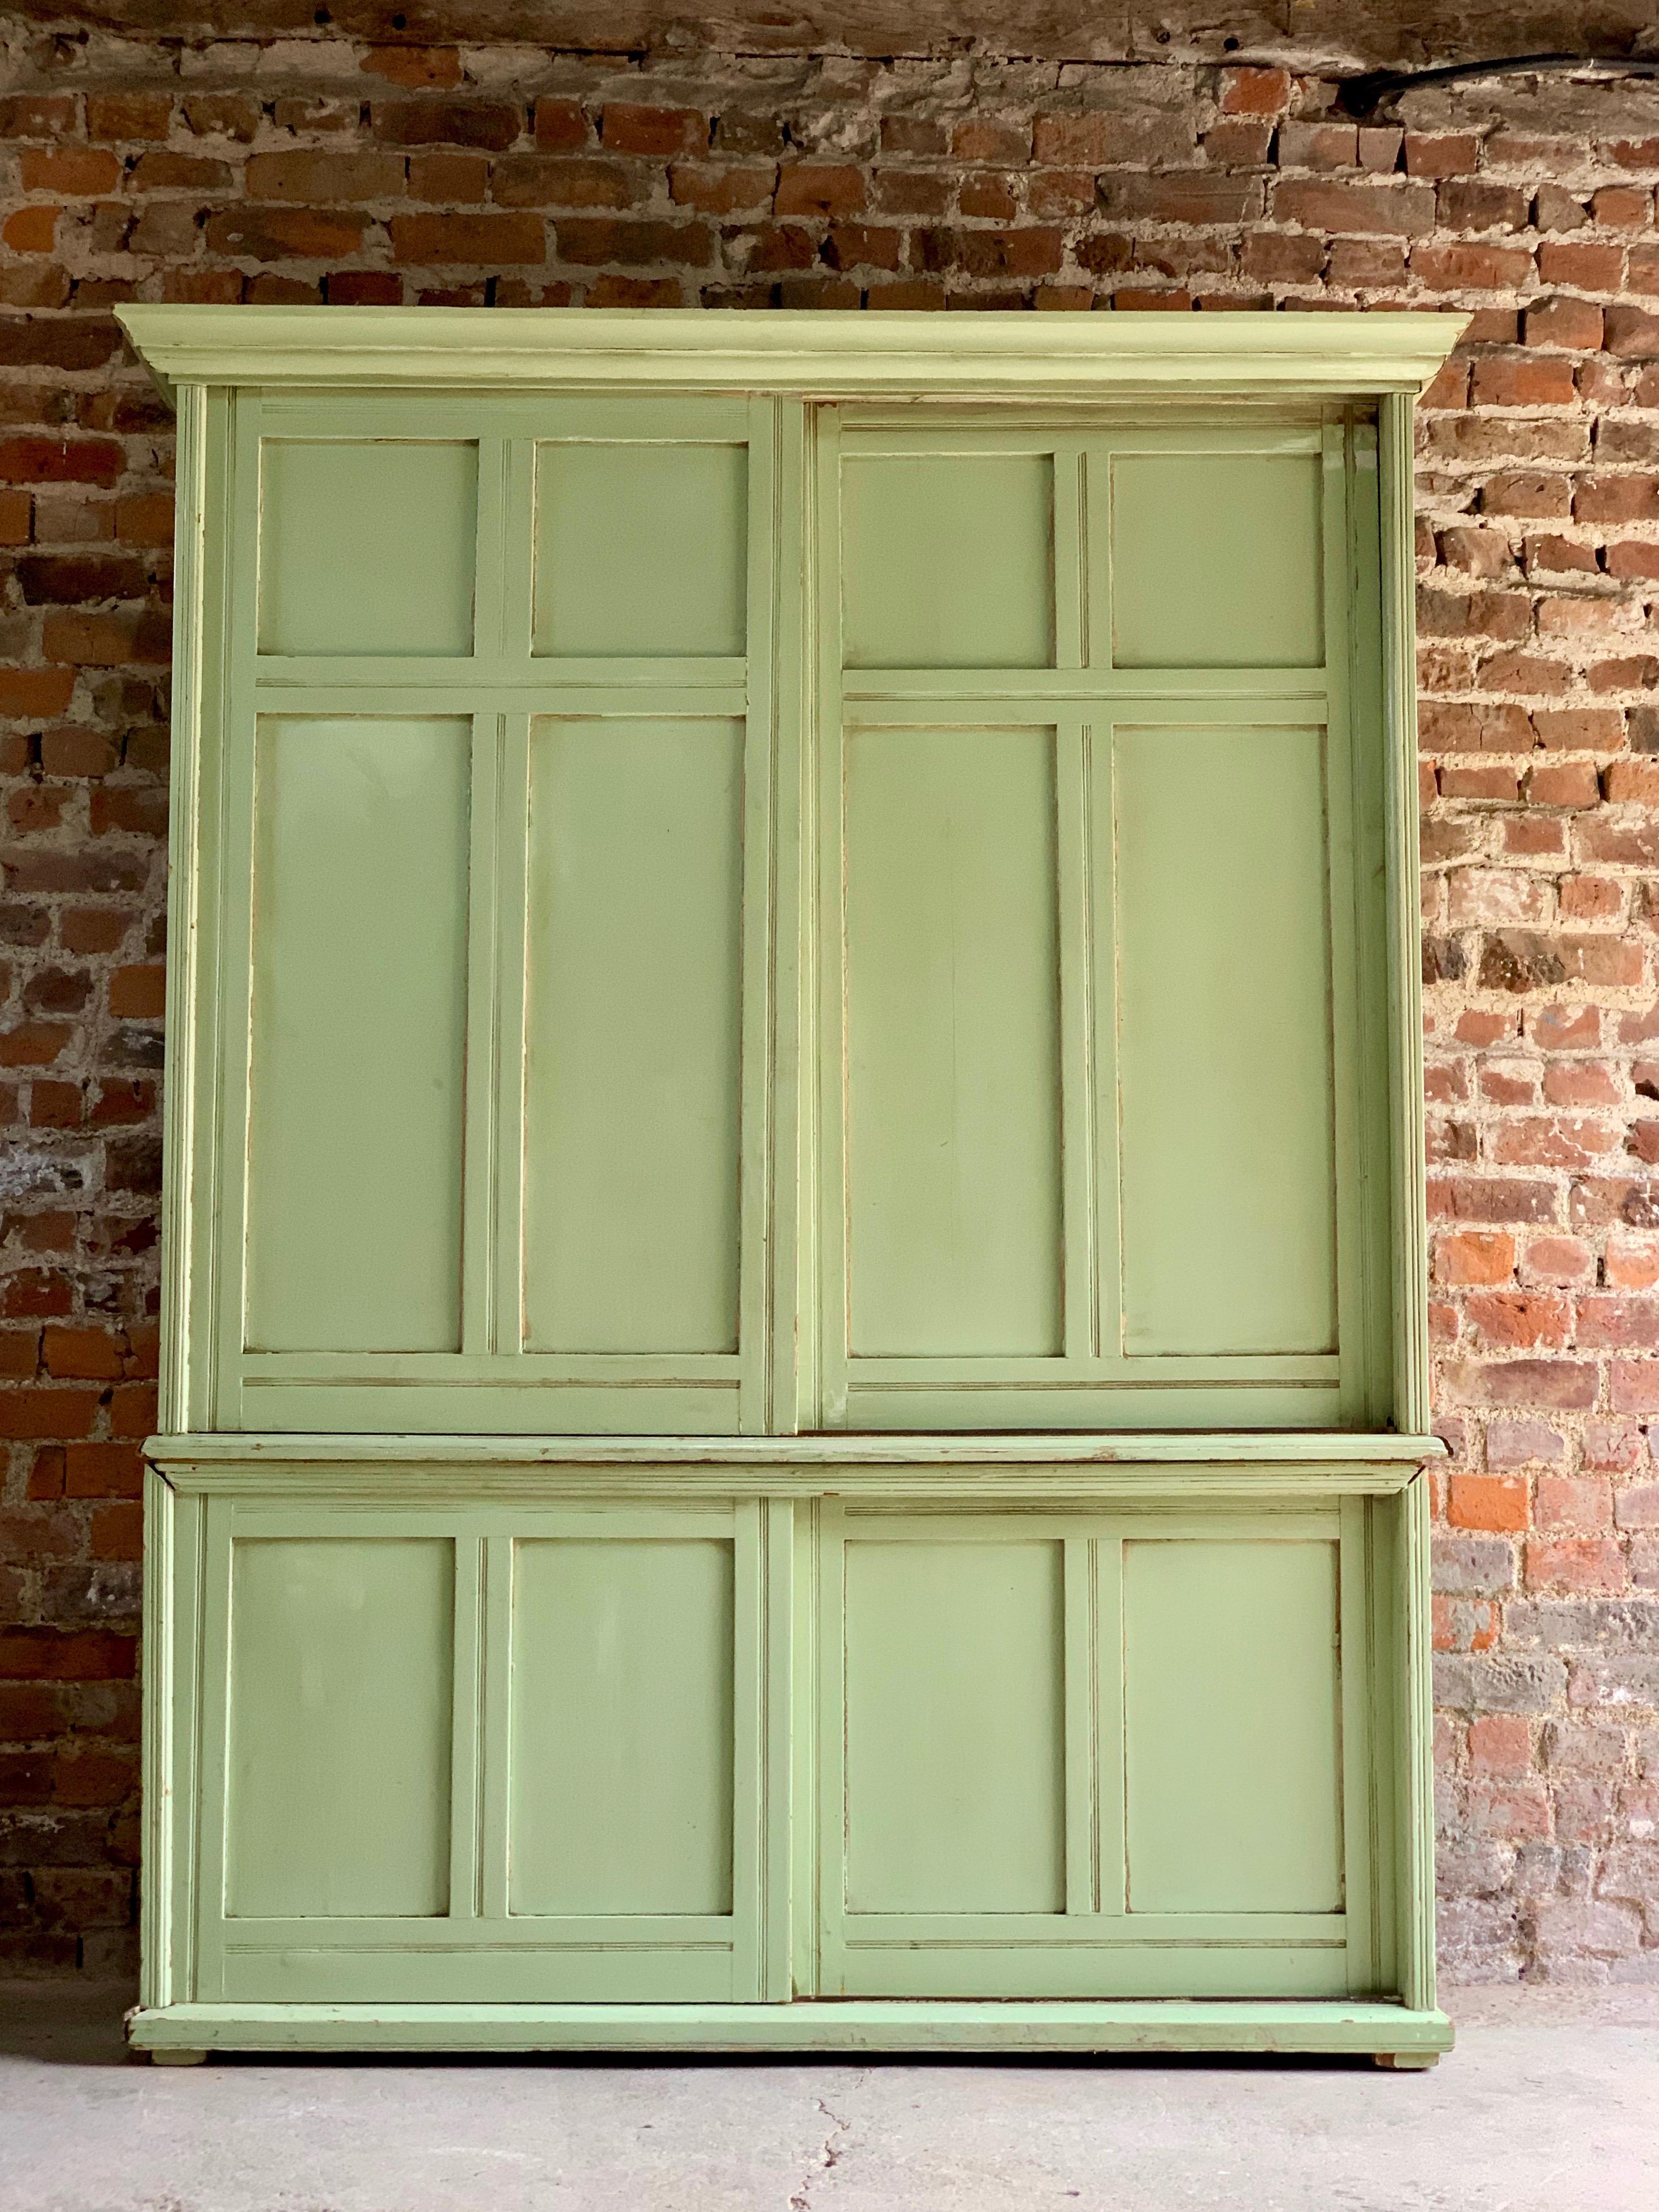 Victorian Pine Housekeeper’s Cupboard Antique circa 1890 

Large 19th century Victorian ‘pistachio’ painted pine Housekeeper’s cupboard circa 1890, this item is original painted not recent with wonderful aged patina, the upper section with moulded